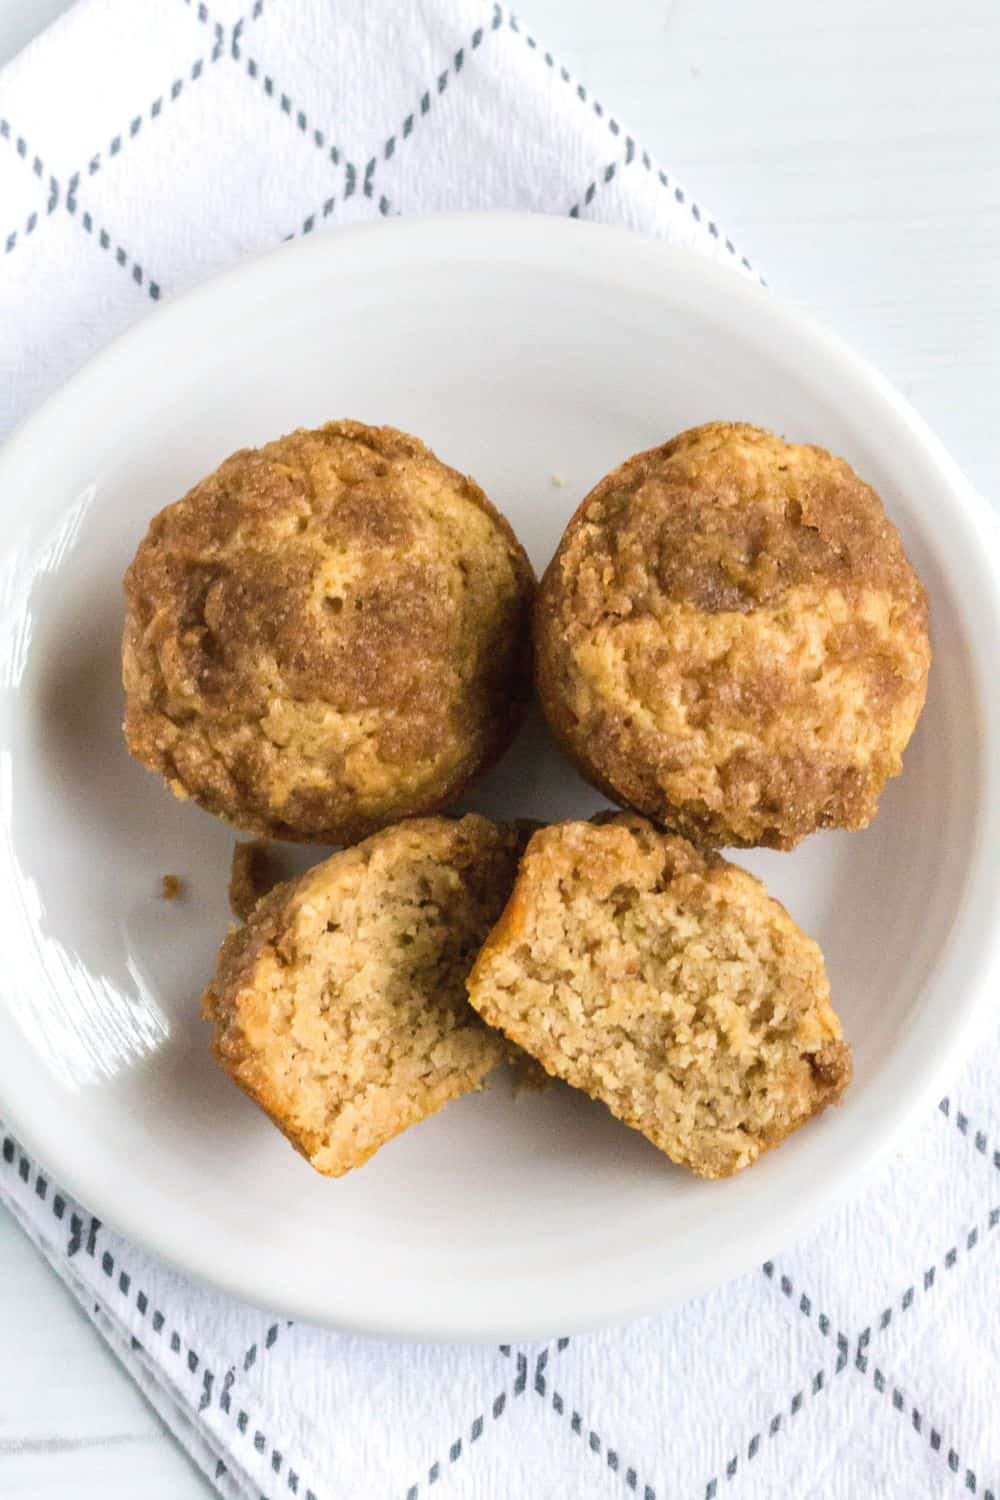 streusel-topped applesauce muffins made with Bisquick served on a white plate